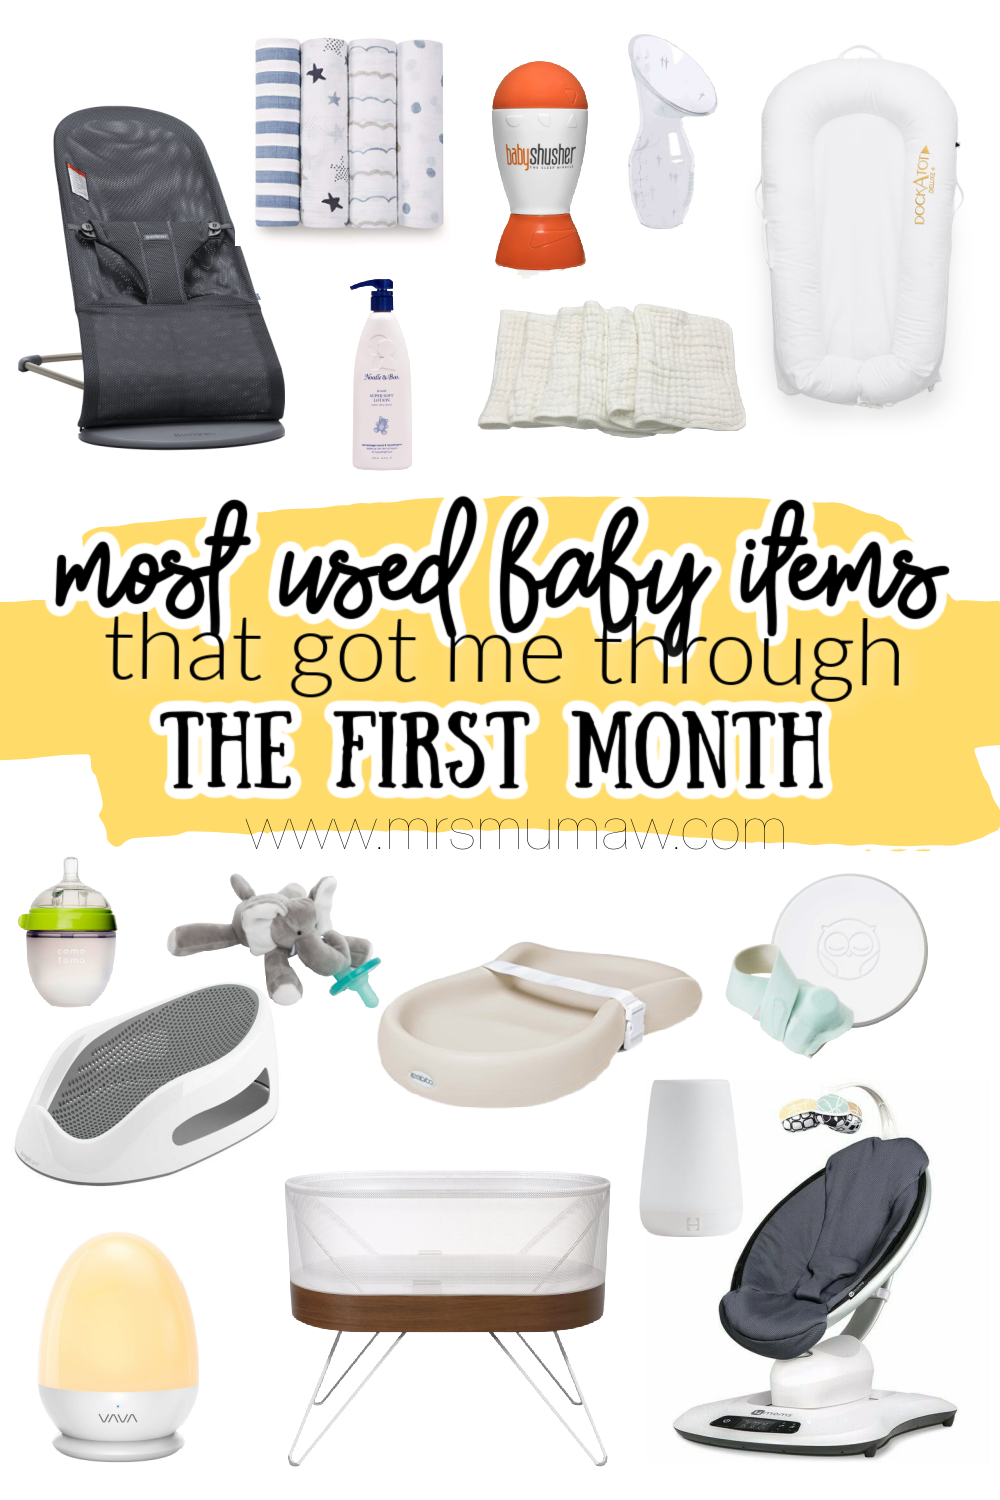 Baby Essentials That Are OK to Buy Used